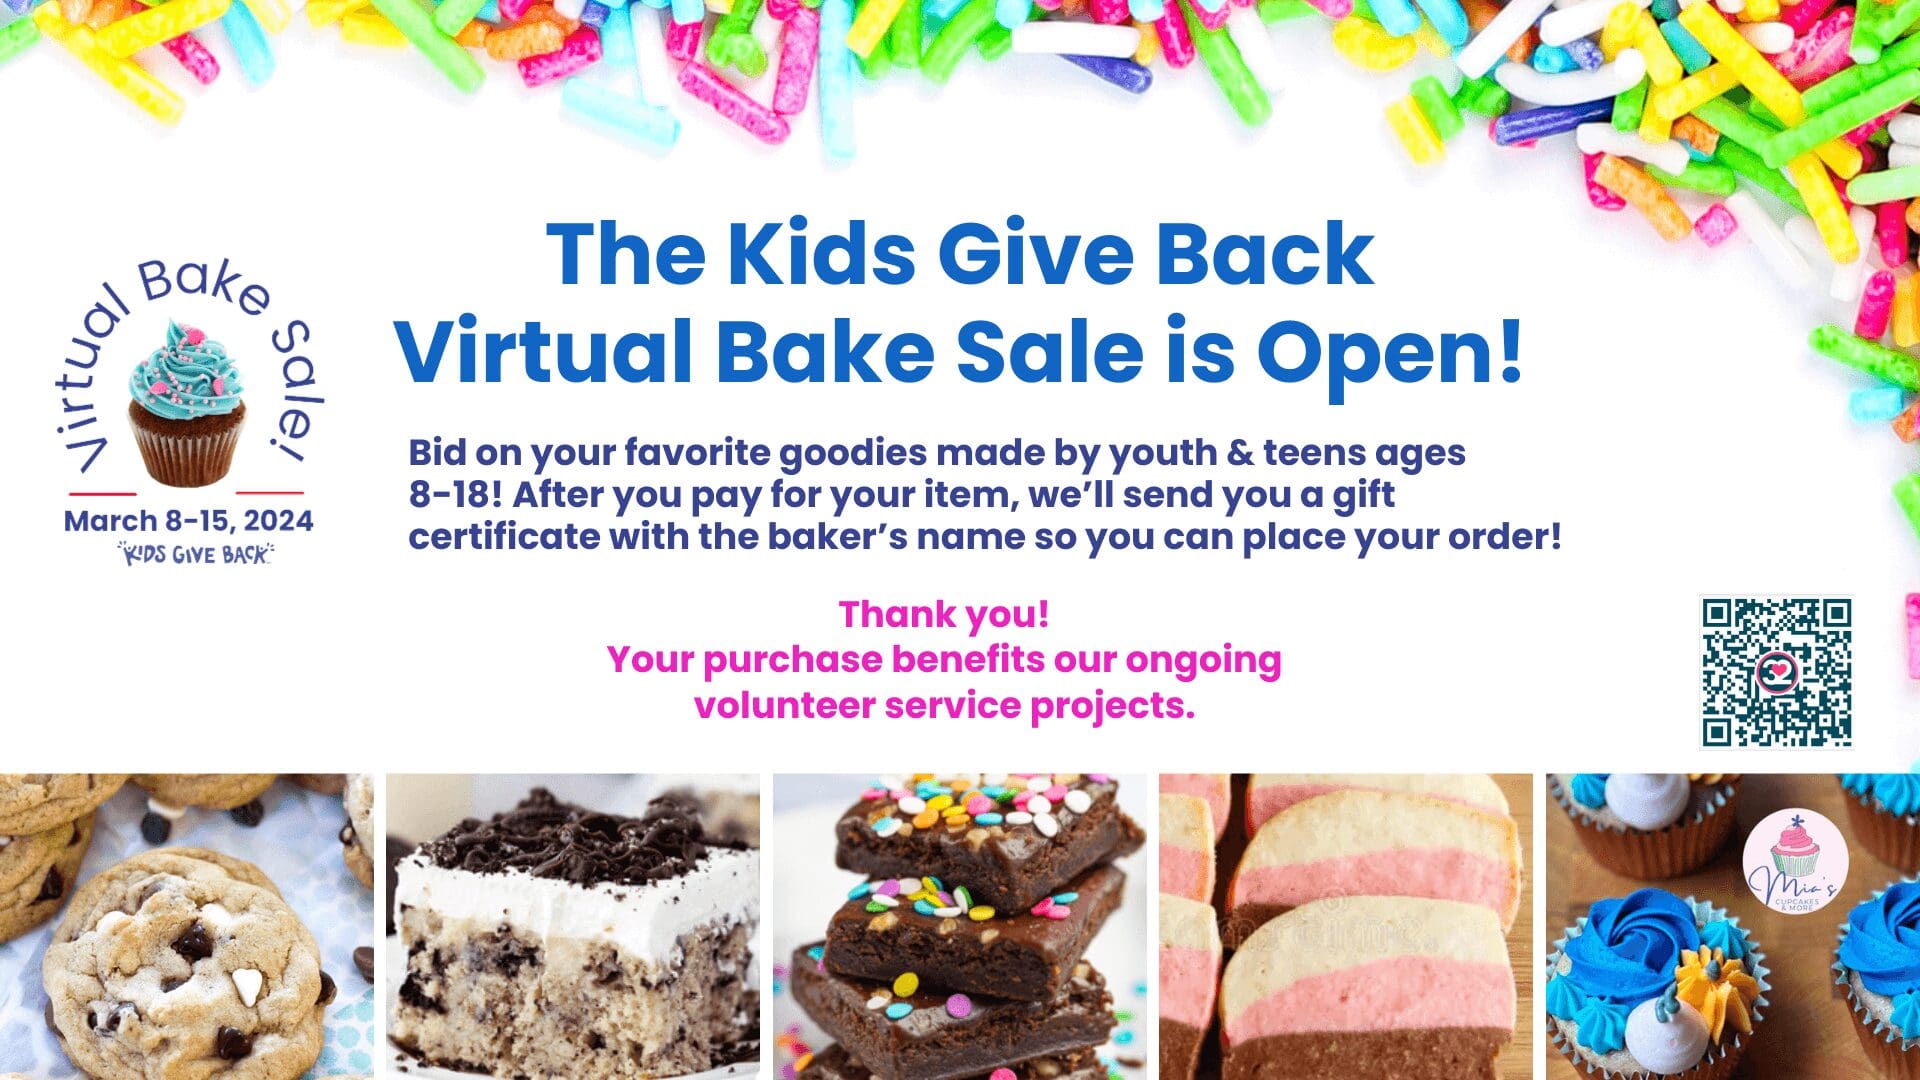 The kids Give Back Virtual Bake Sale is Open